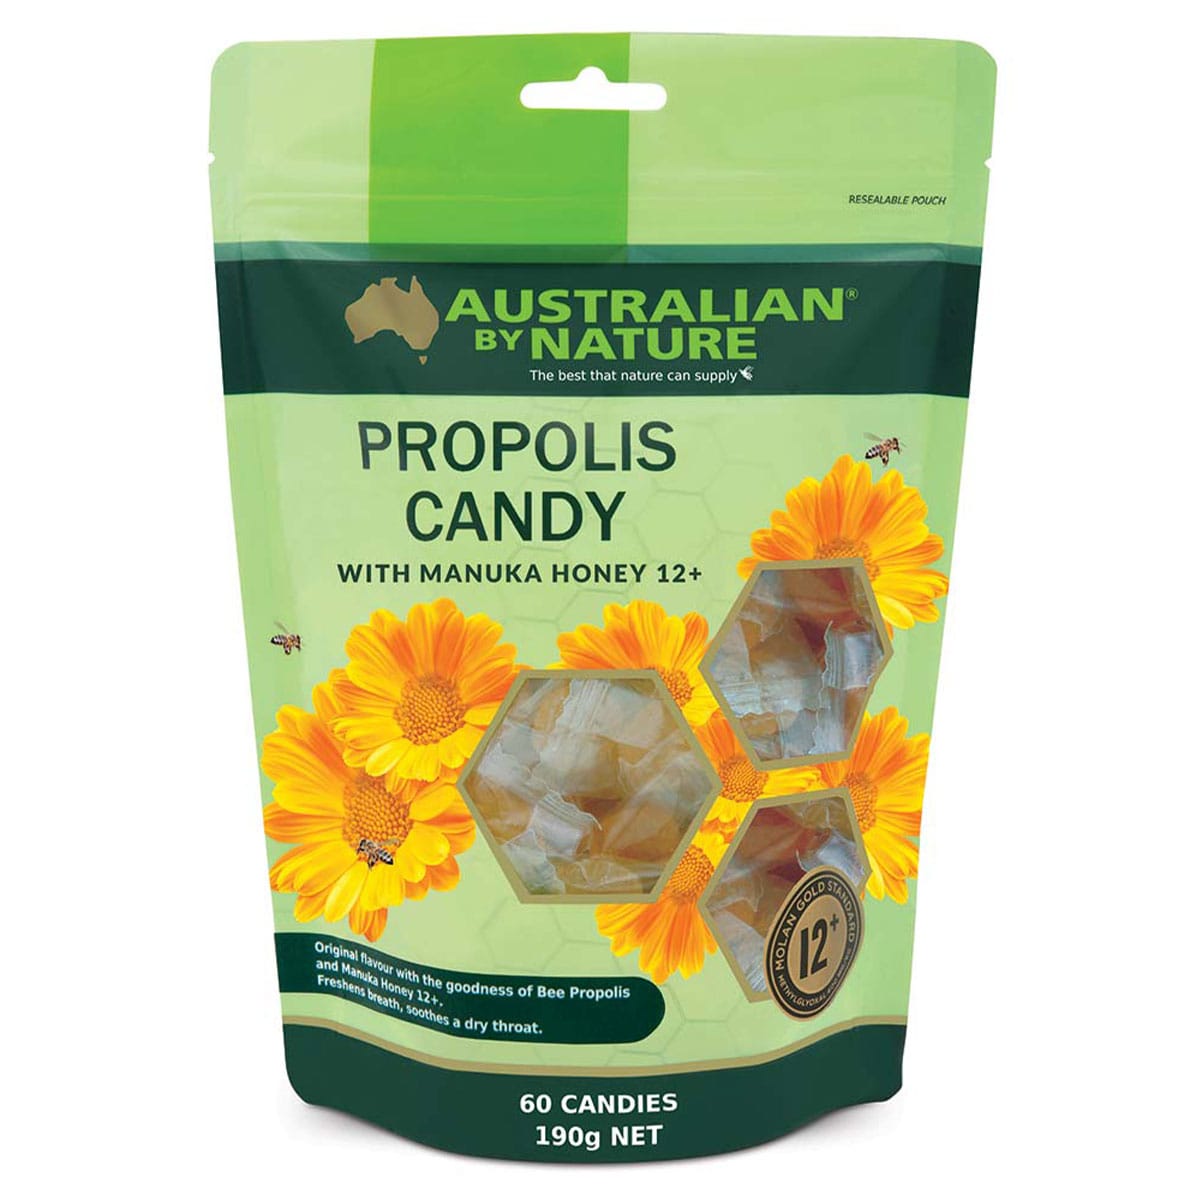 Australian by Nature Propolis Candy with Manuka Honey 60 Candies Australia